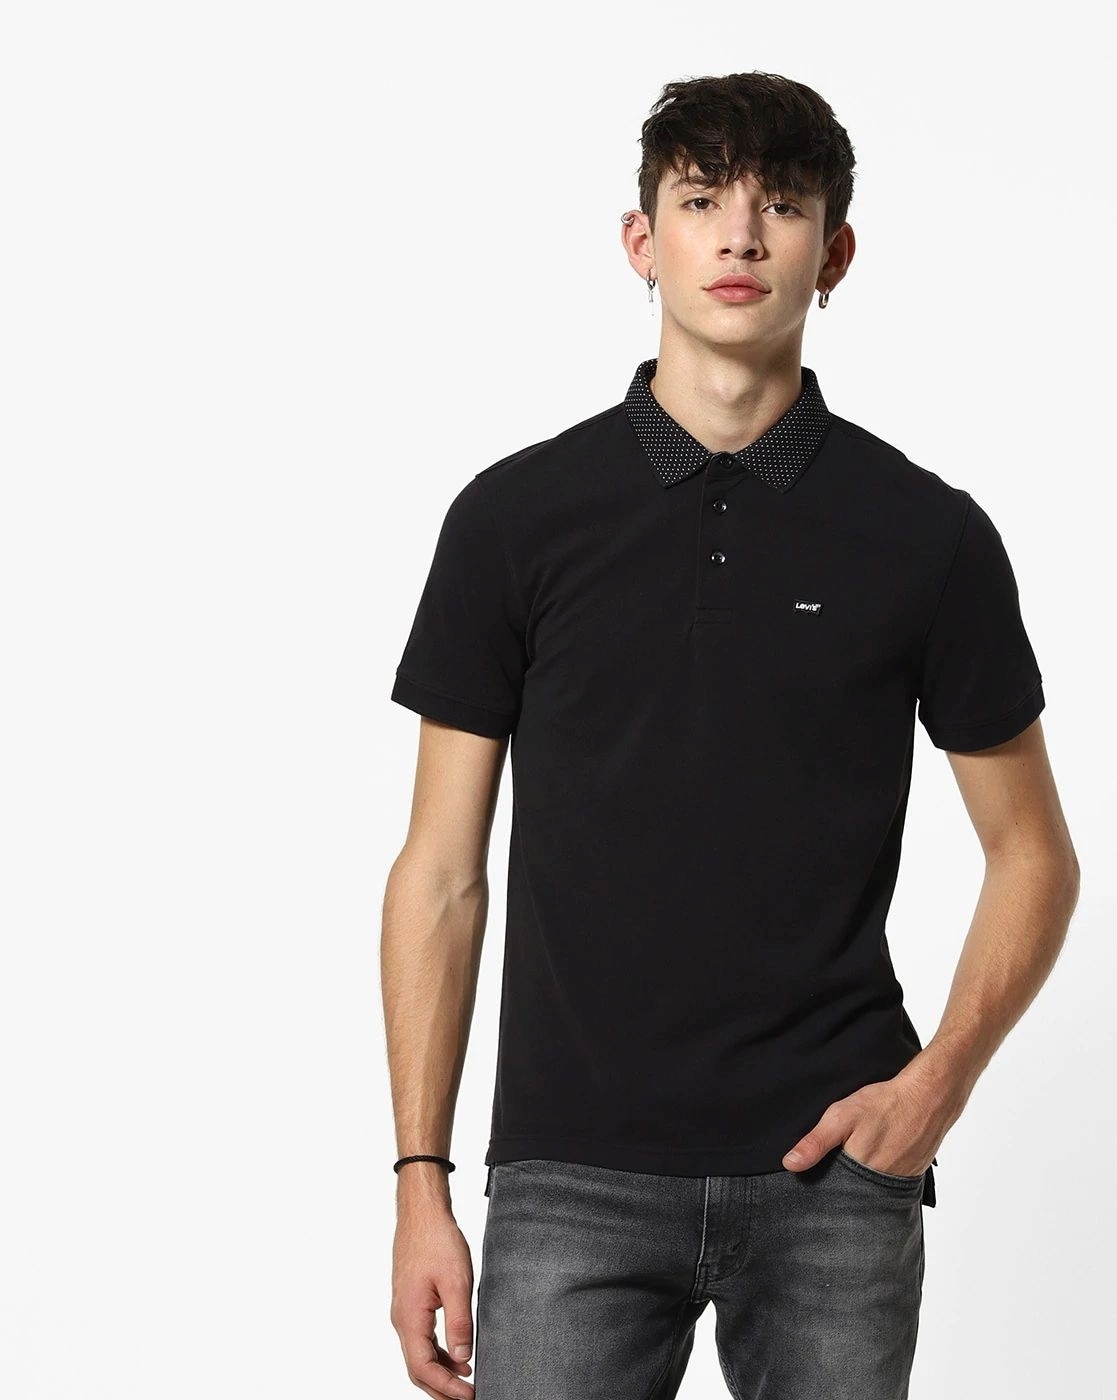 Buy Black Tshirts for Men by LEVIS 